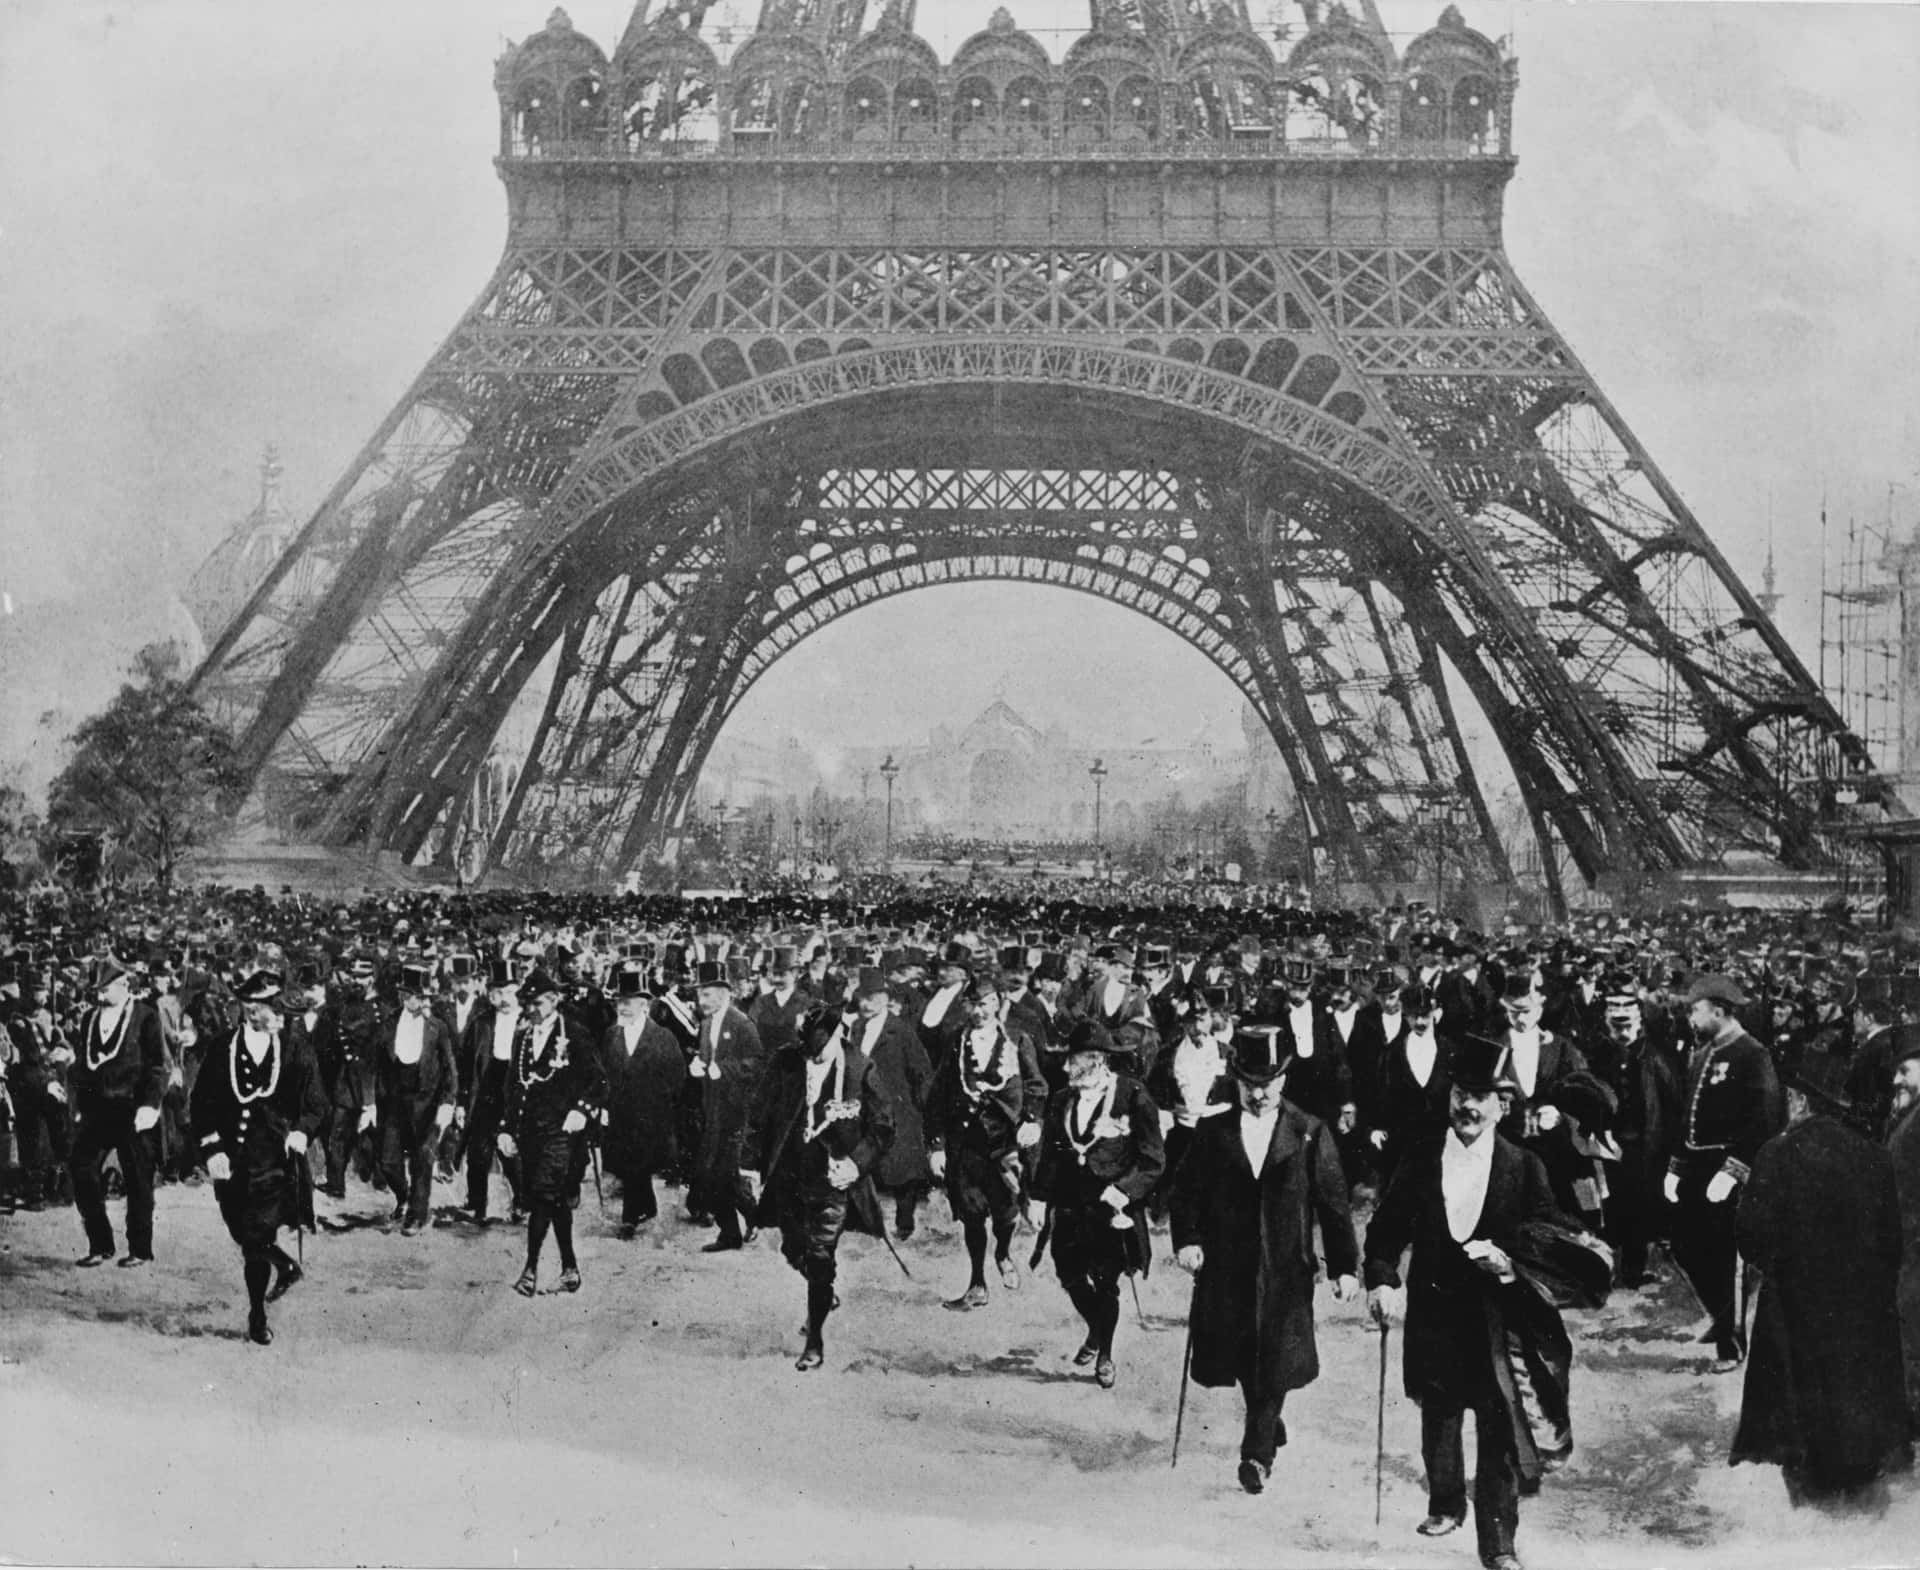 A Group Of People Walking In Front Of The Eiffel Tower